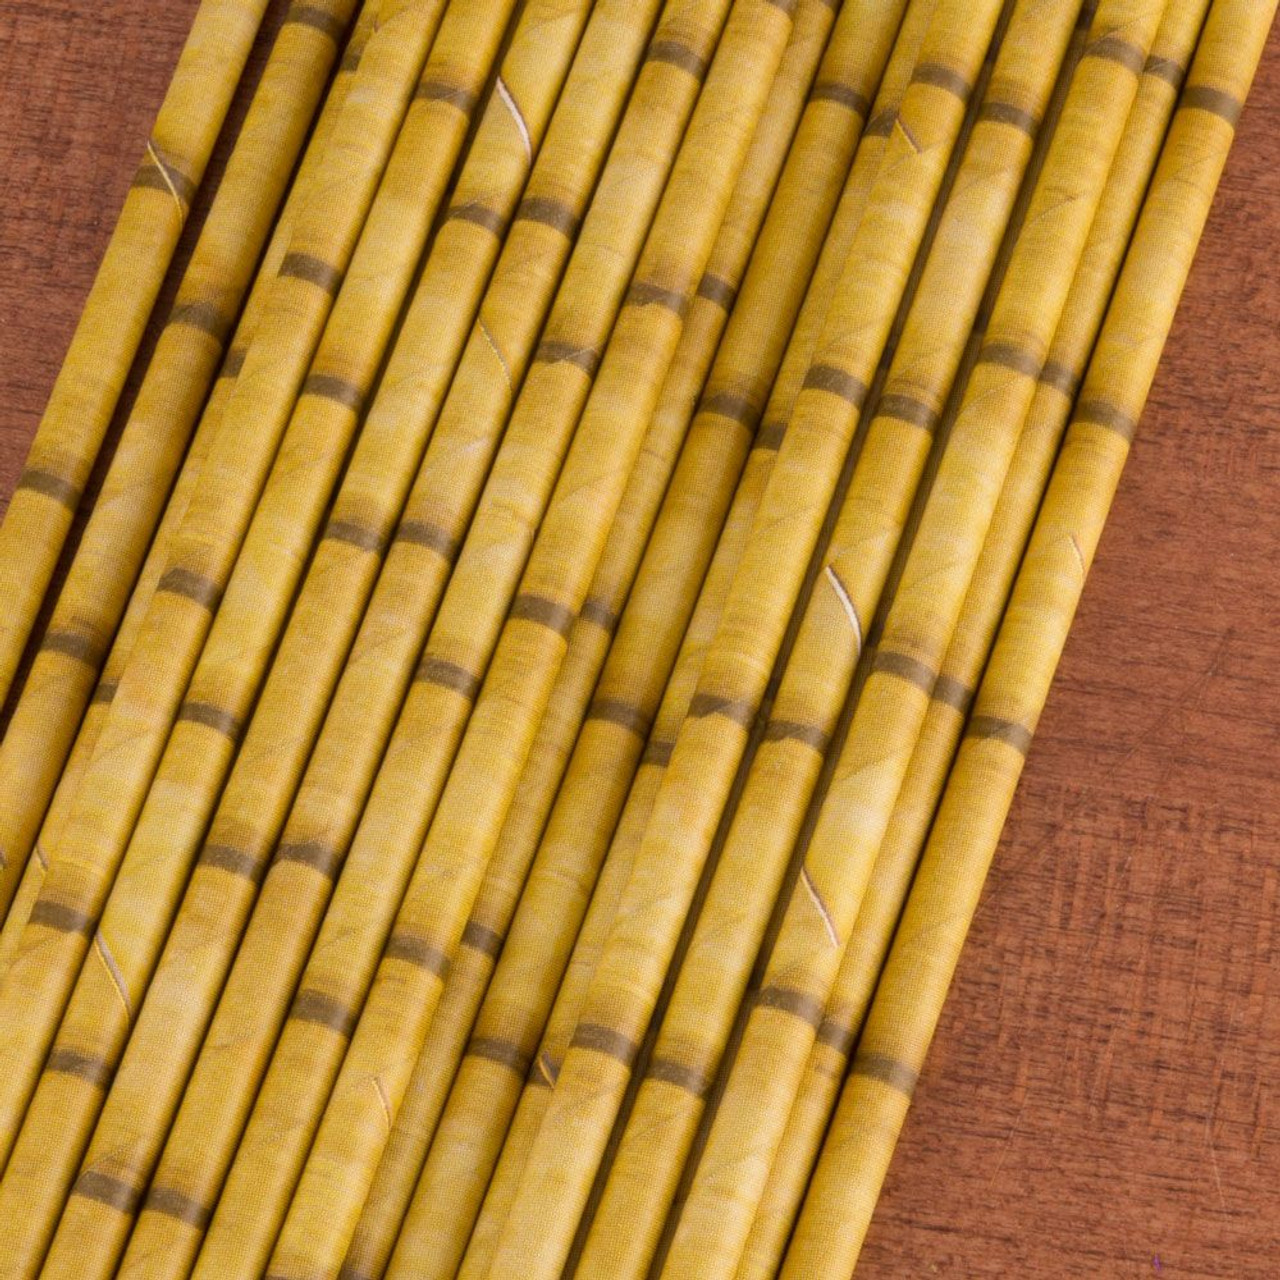 Bamboo Straws - All you need to know